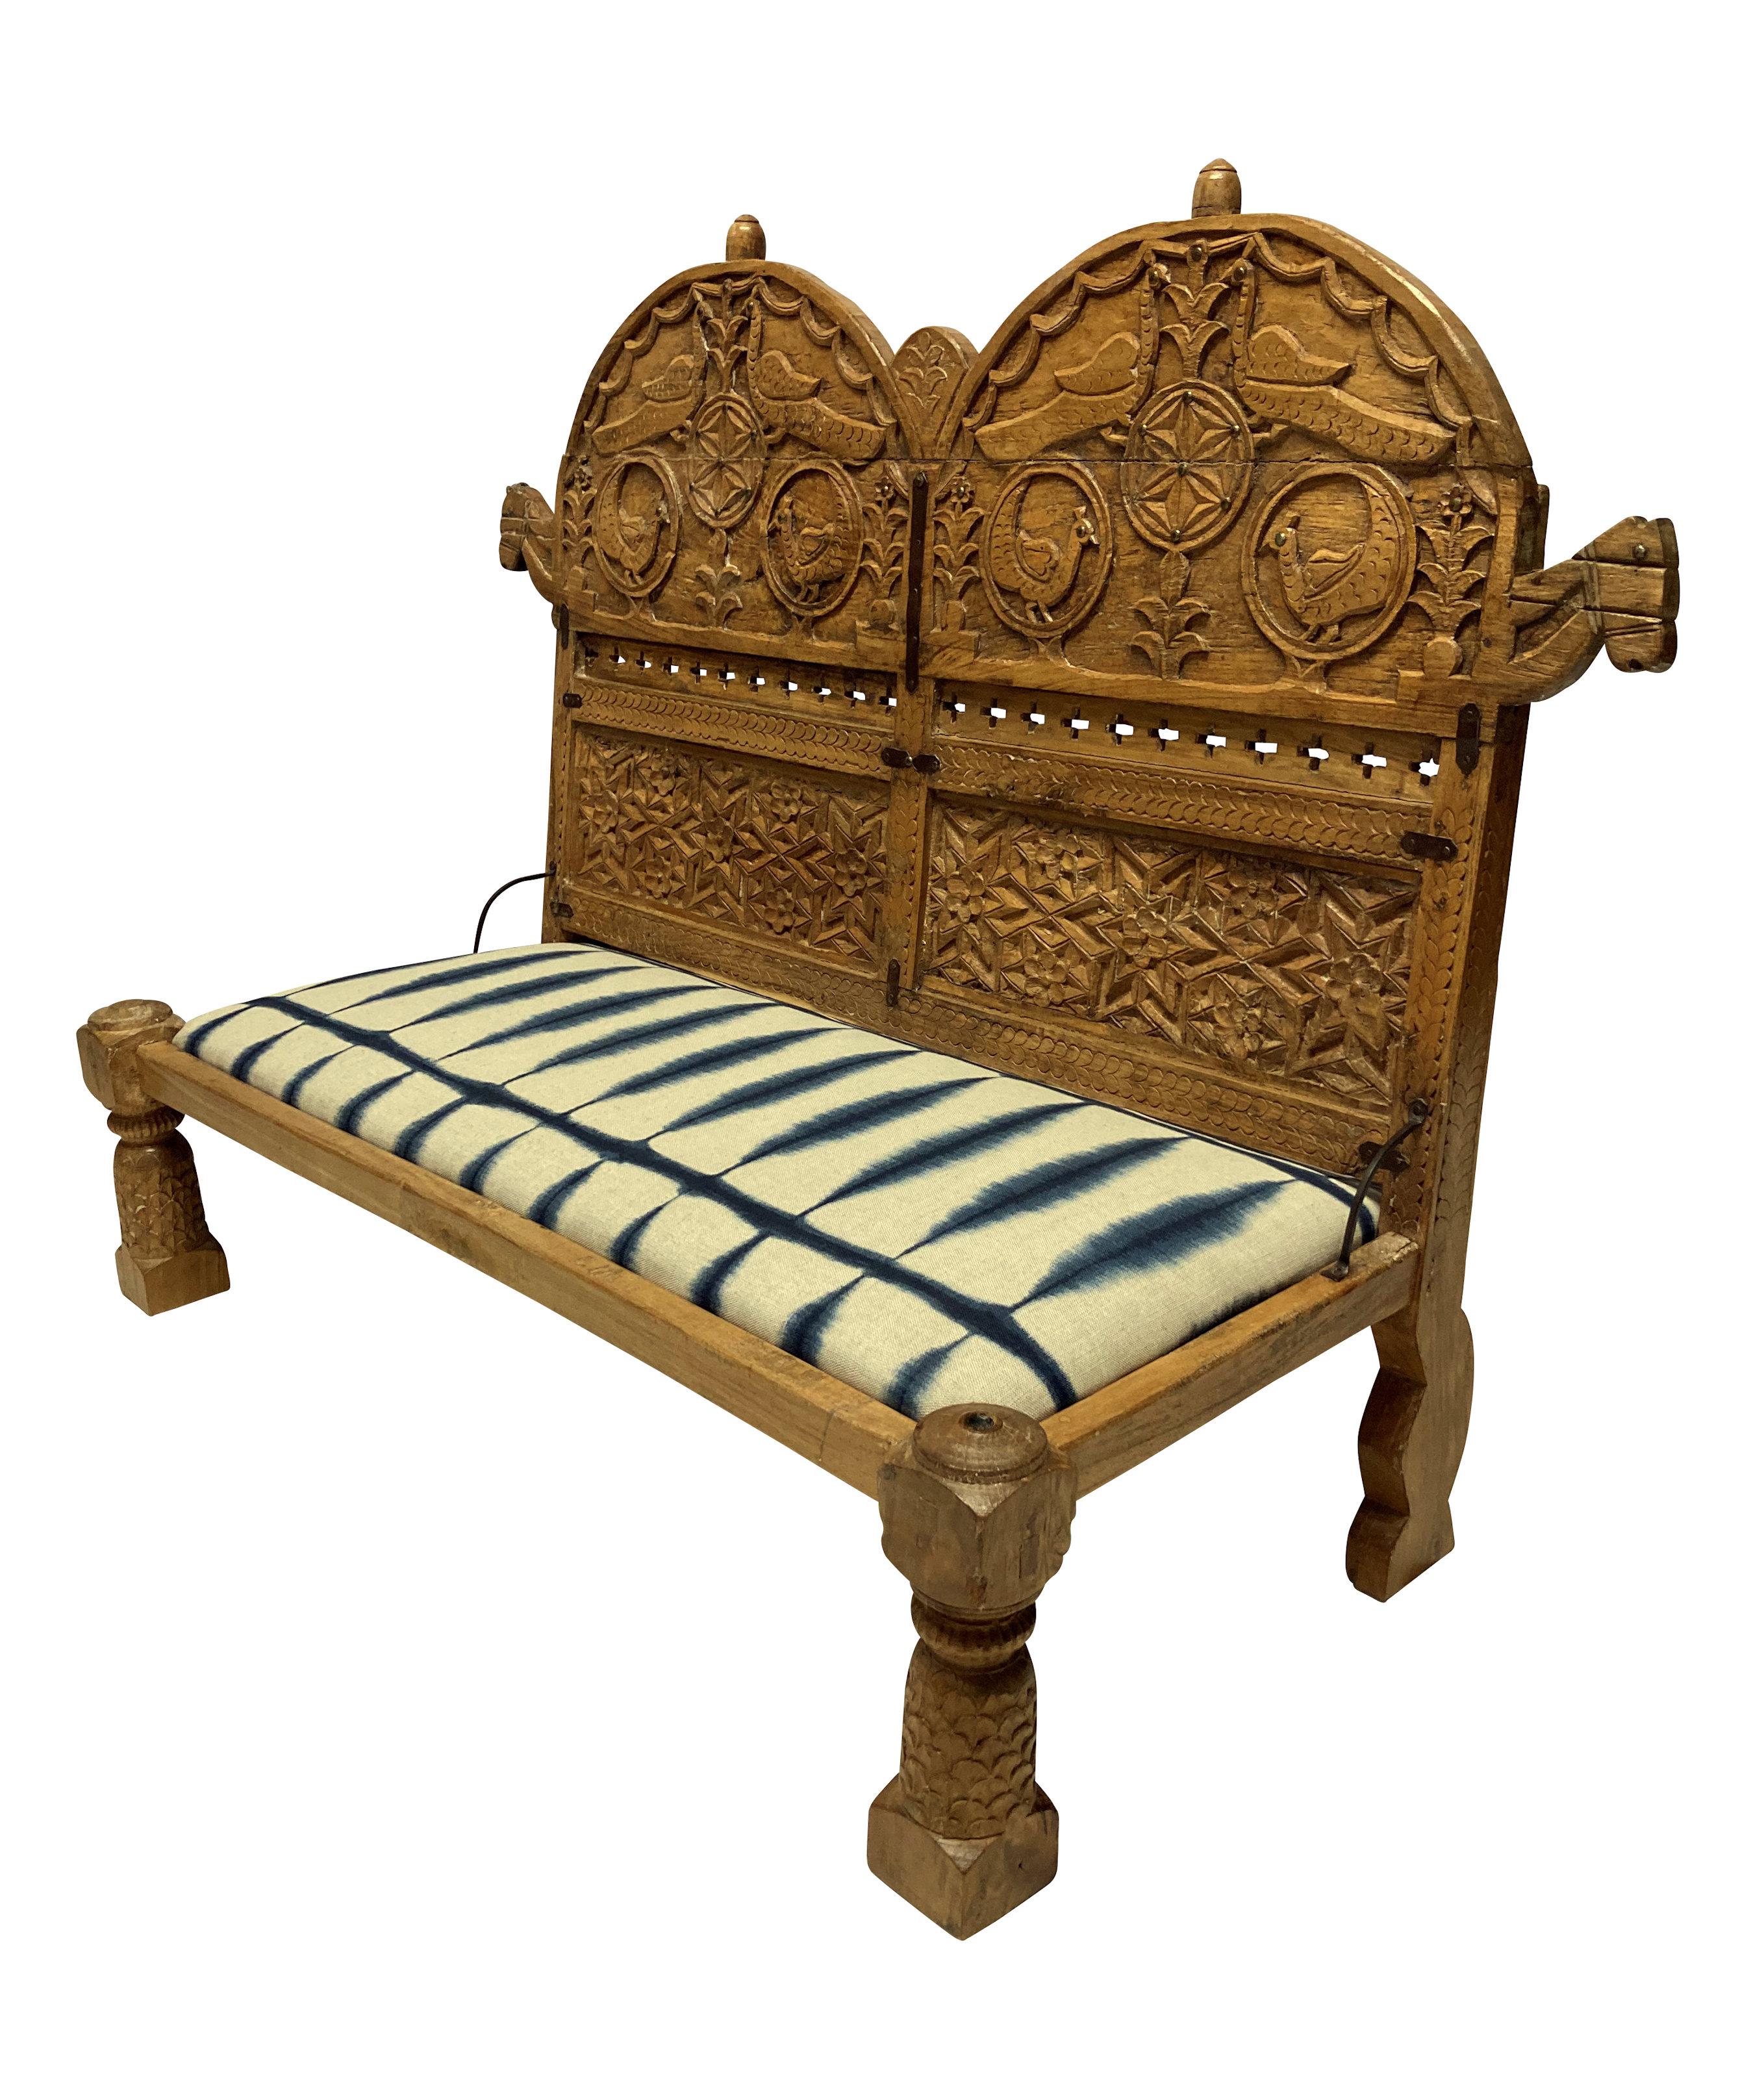 An Indian ornately carved teak floor seat, with peacocks and foliage. Newly upholstered in linen.